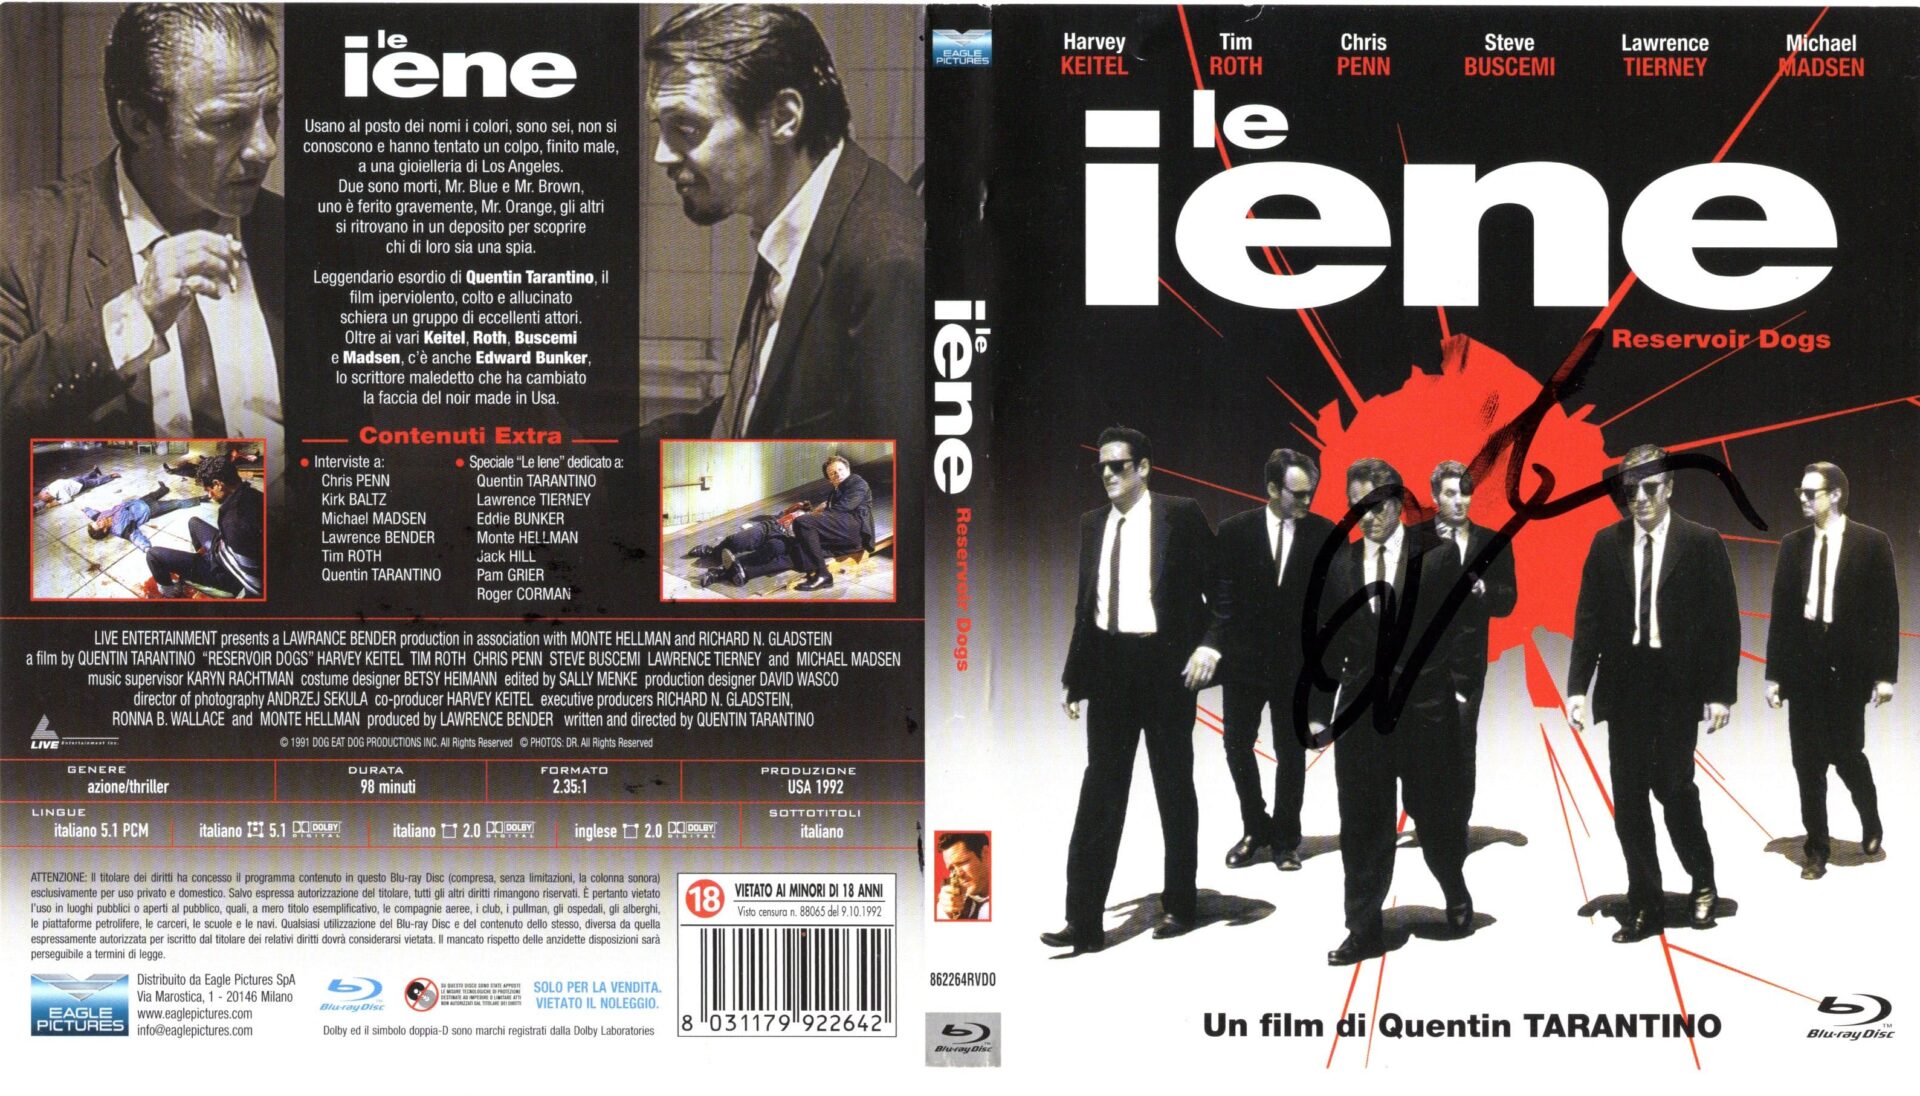 Quentin Tarantino – Signed Blu-Ray Cover – Reservoir Dogs (Le iene